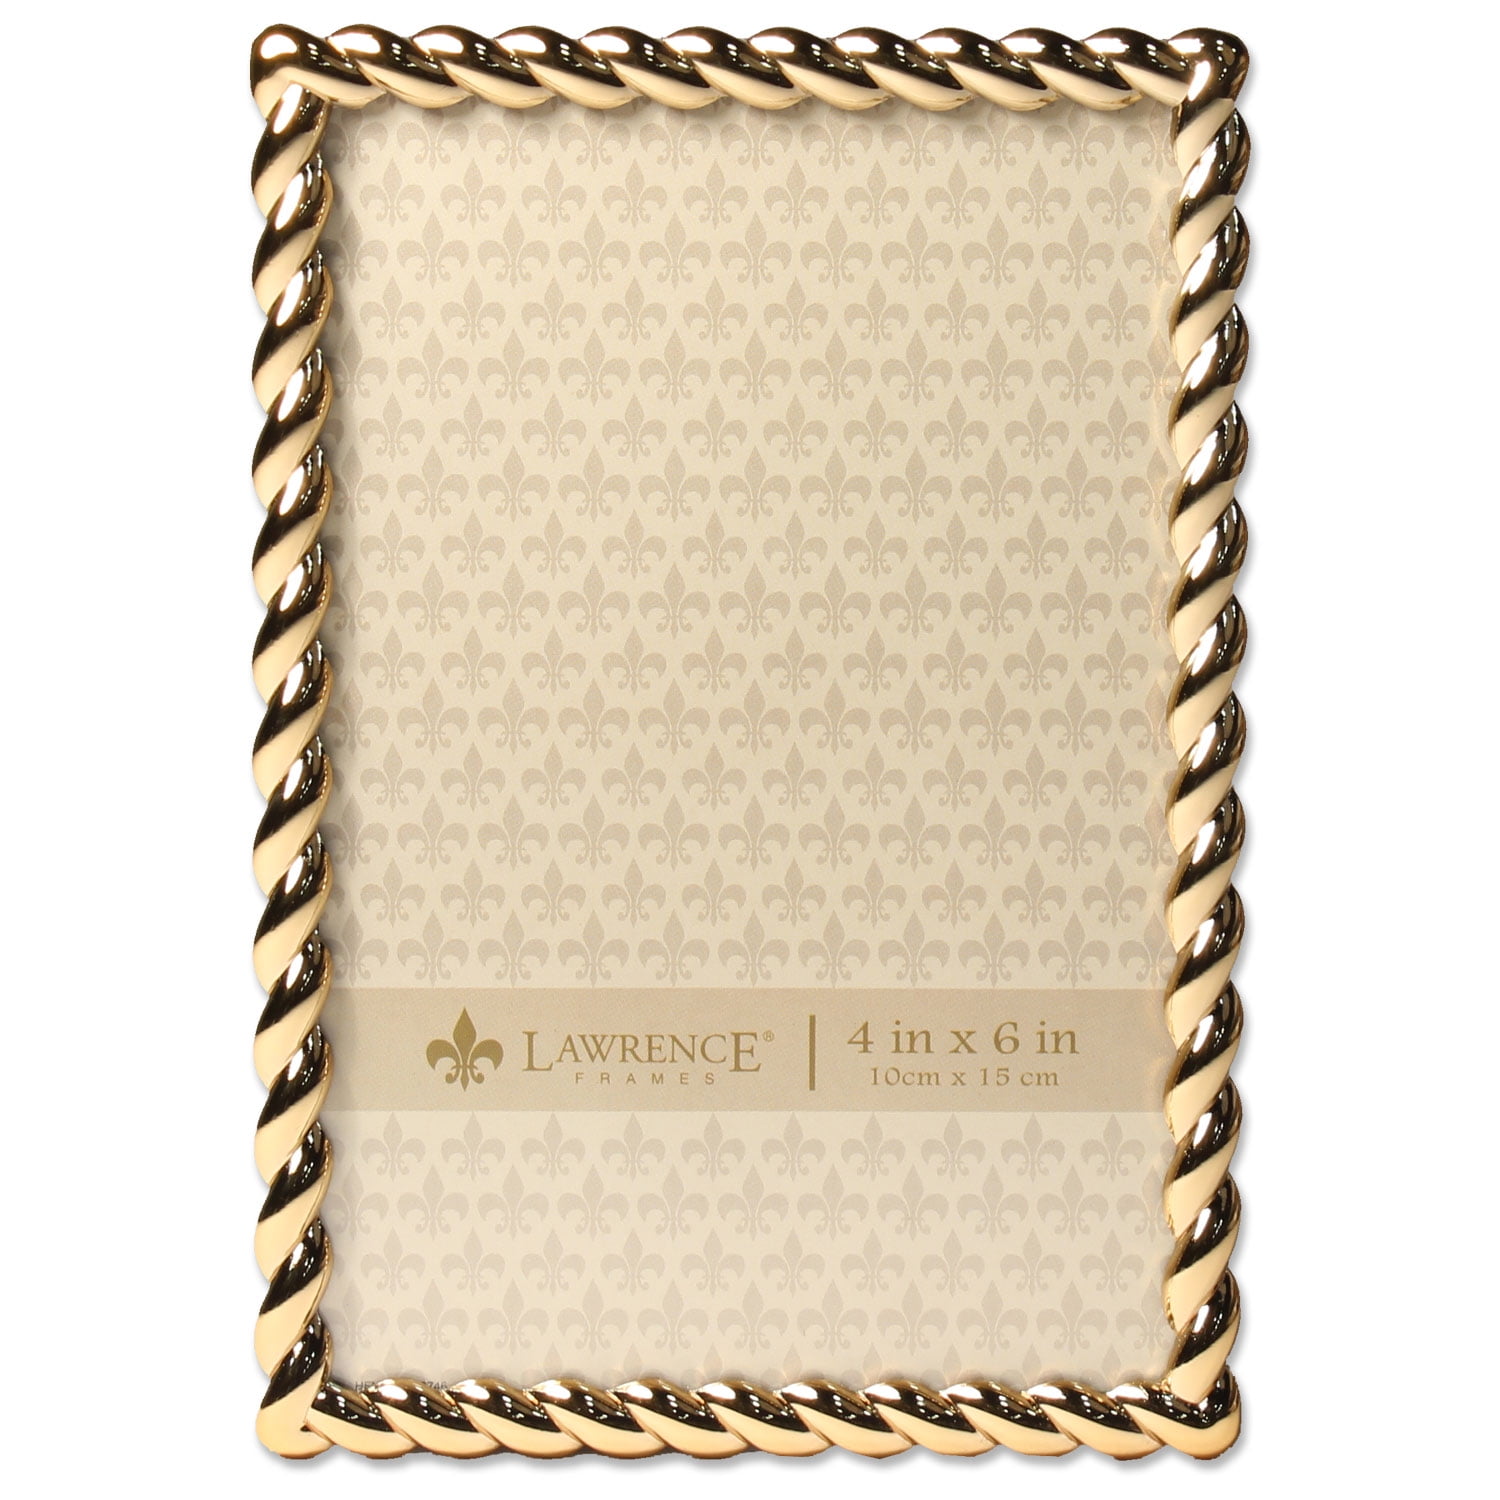 4 by 6-Inch Gold Lawrence Frames Sutter Burnished Picture Frame